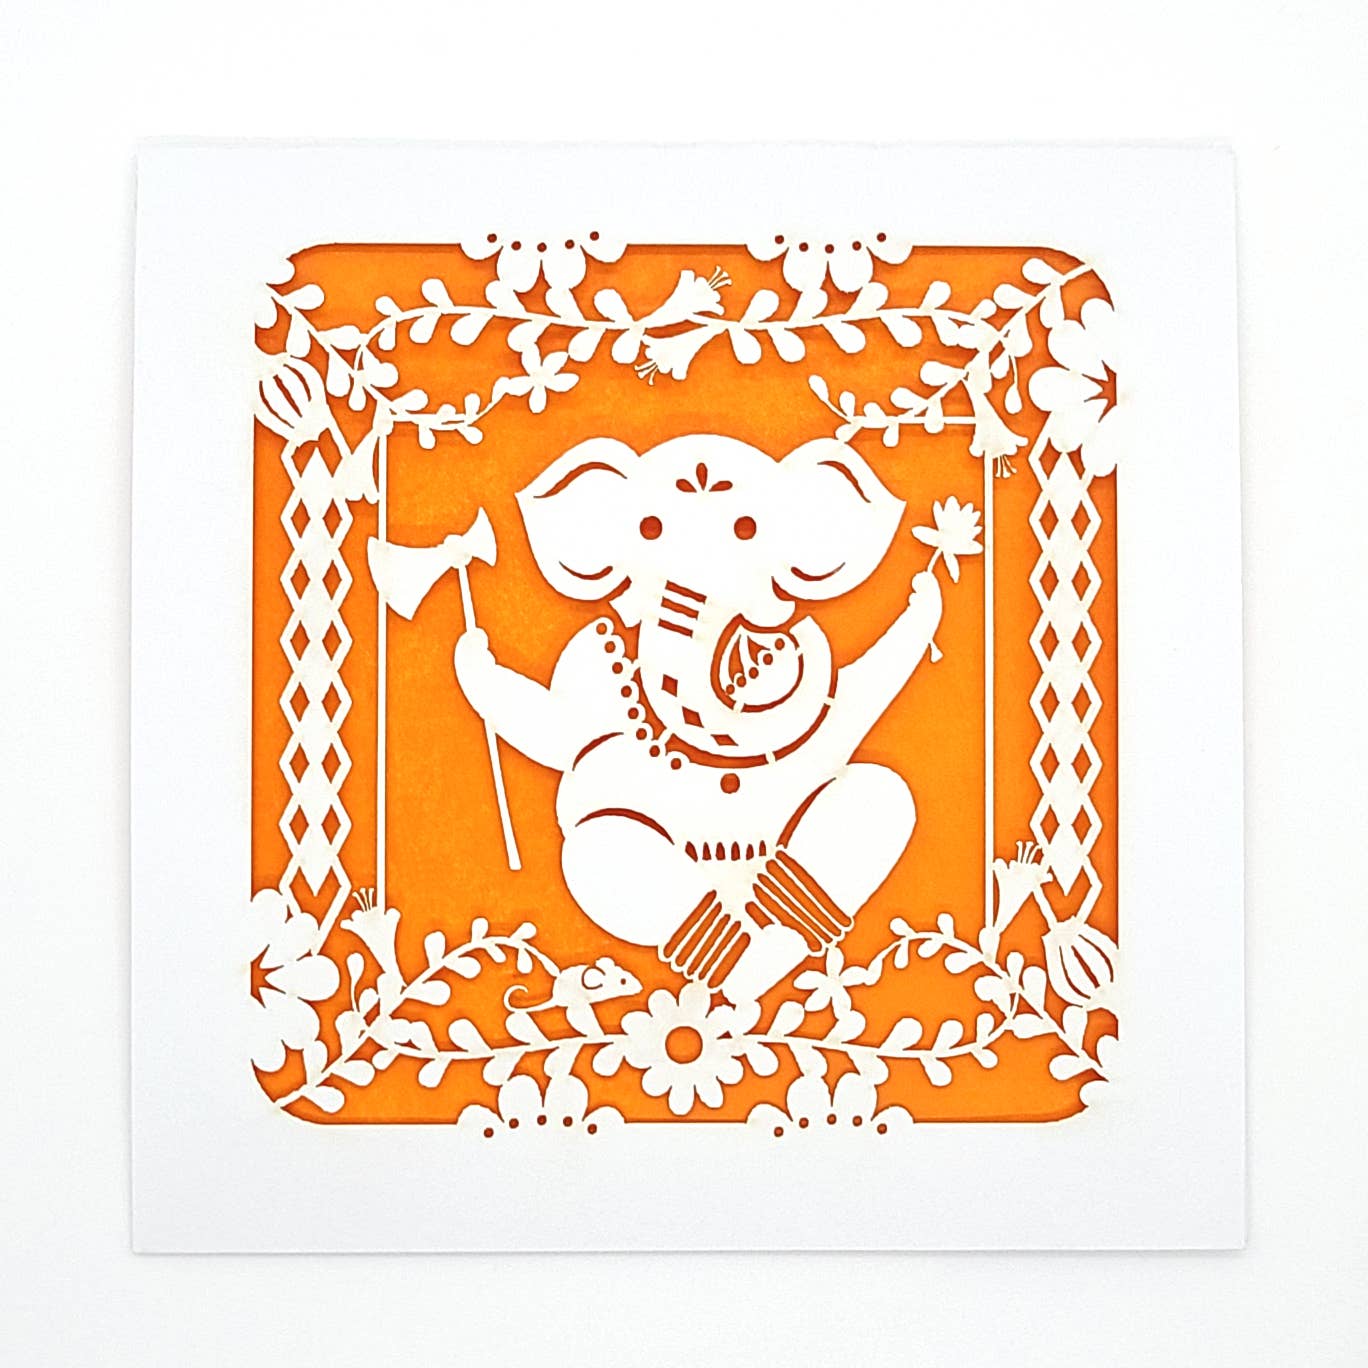 A blank card with an image of Ganesha on an orange background